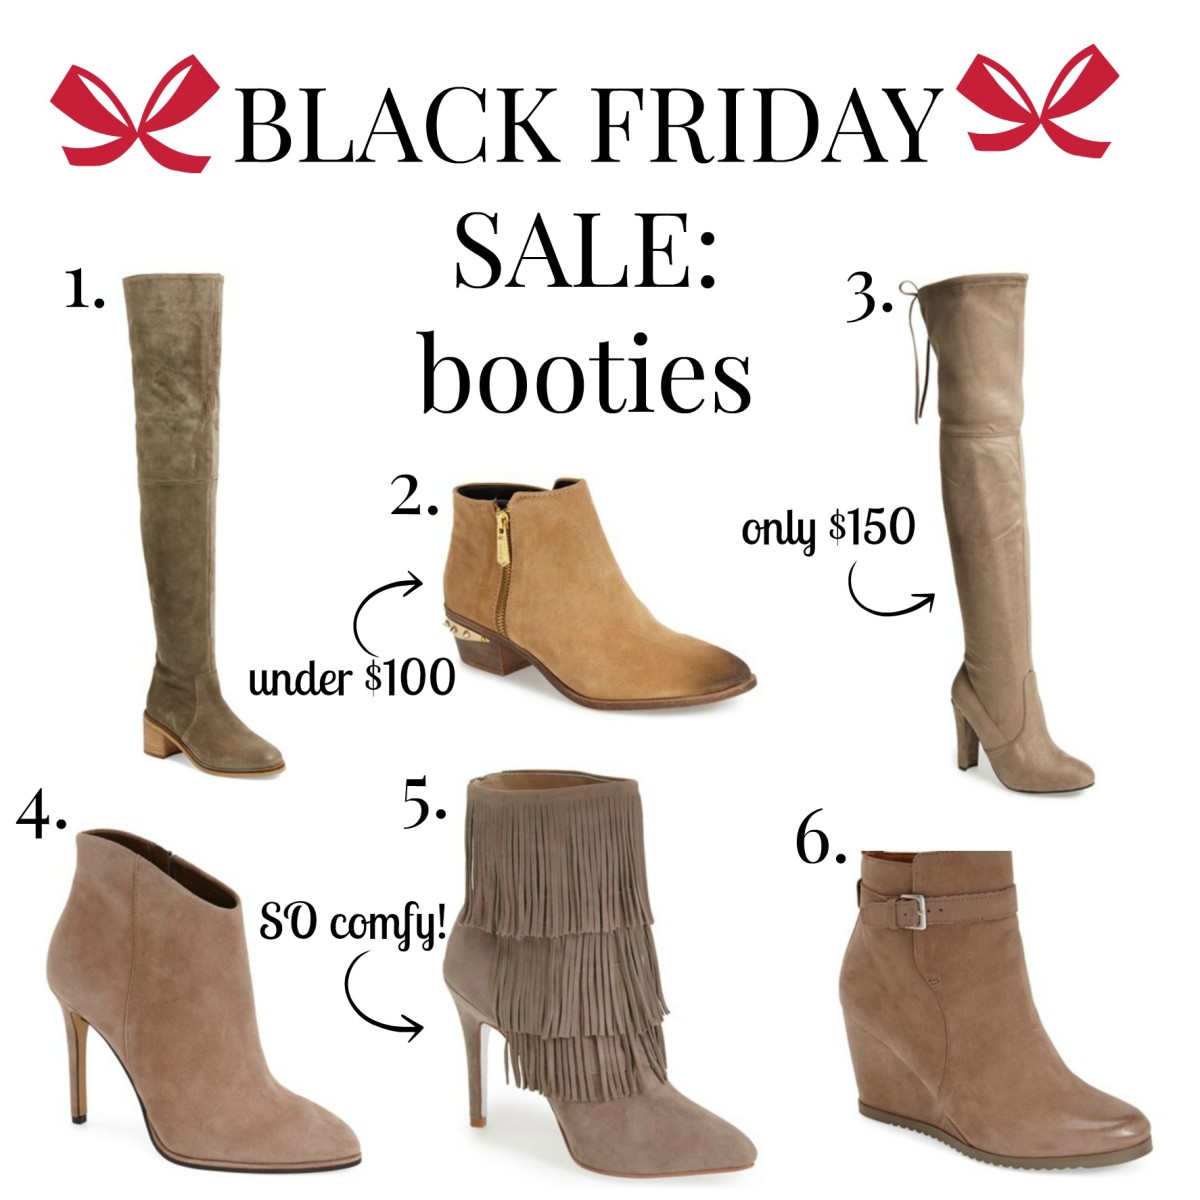 Black Friday Sale Boots - Airelle Snyder